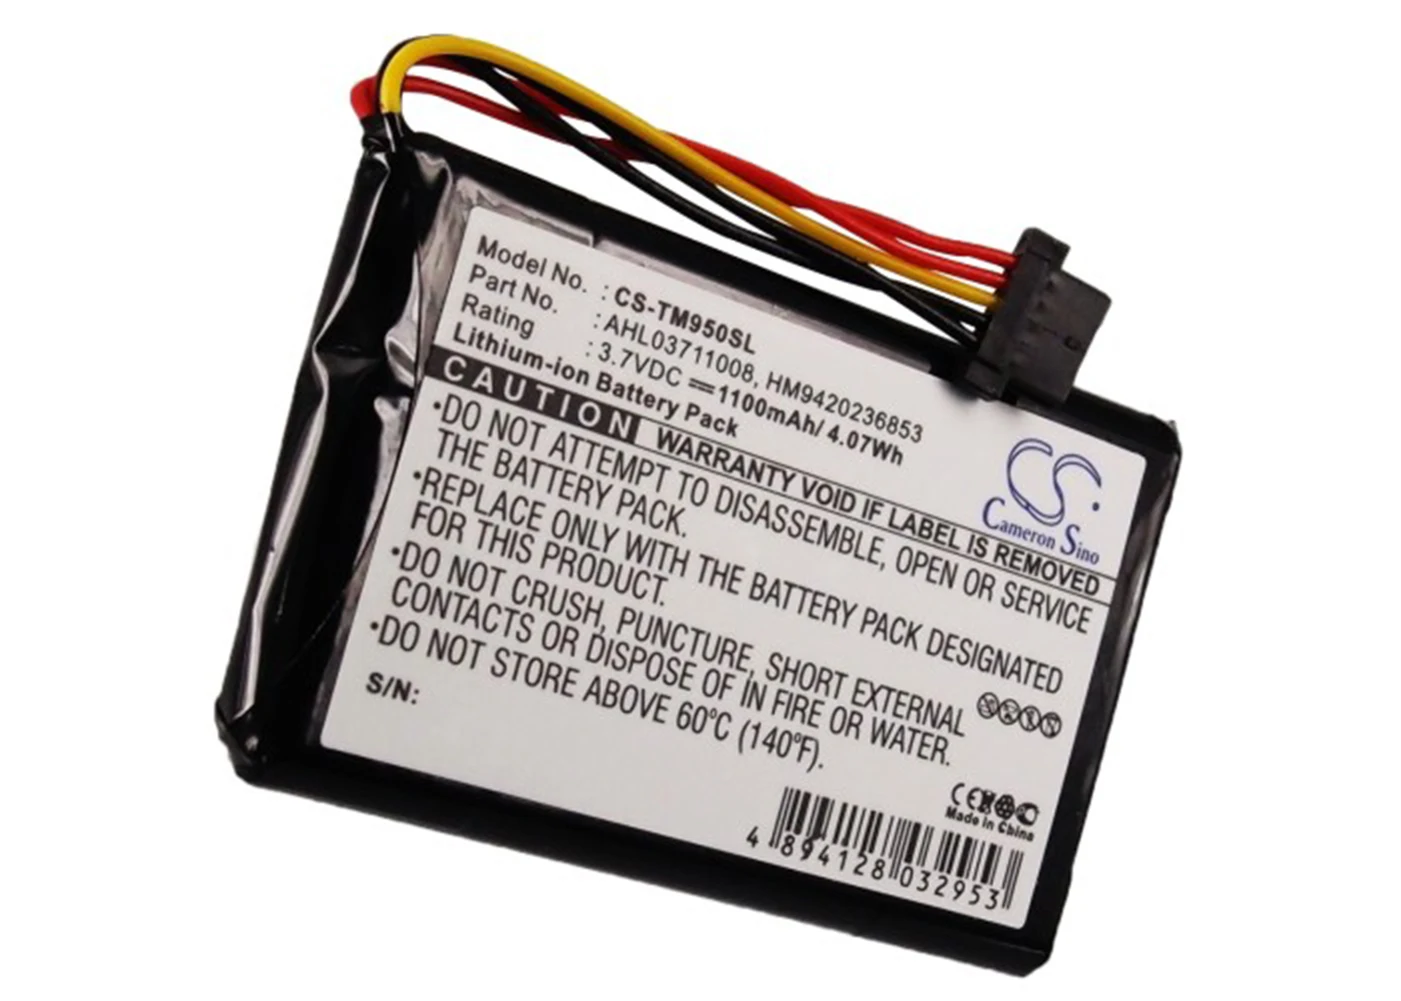 

Cameron Sino 1100mA Battery for TomTom 4CP9.002.00, 8CP9.011.10, Go 950, Go 950 Live AHL03711008, HM9420236853